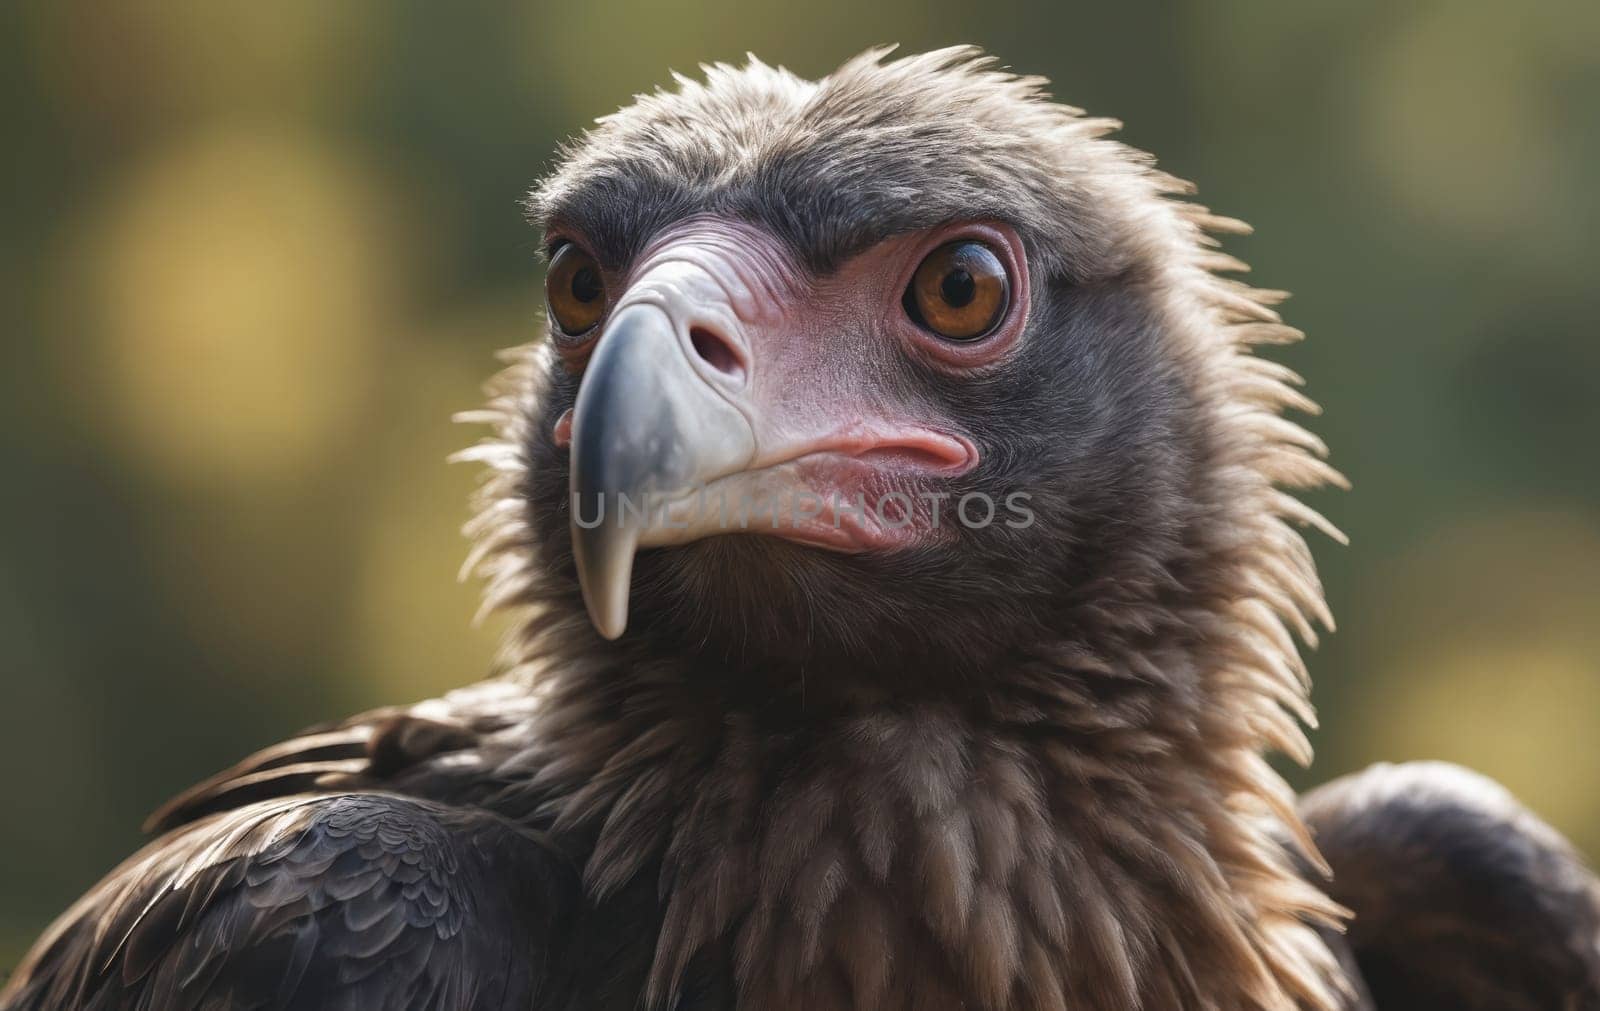 A closeup of a vulture, a bird of prey in the Accipitridae family, with its sharp beak and piercing eyes, staring directly at the camera